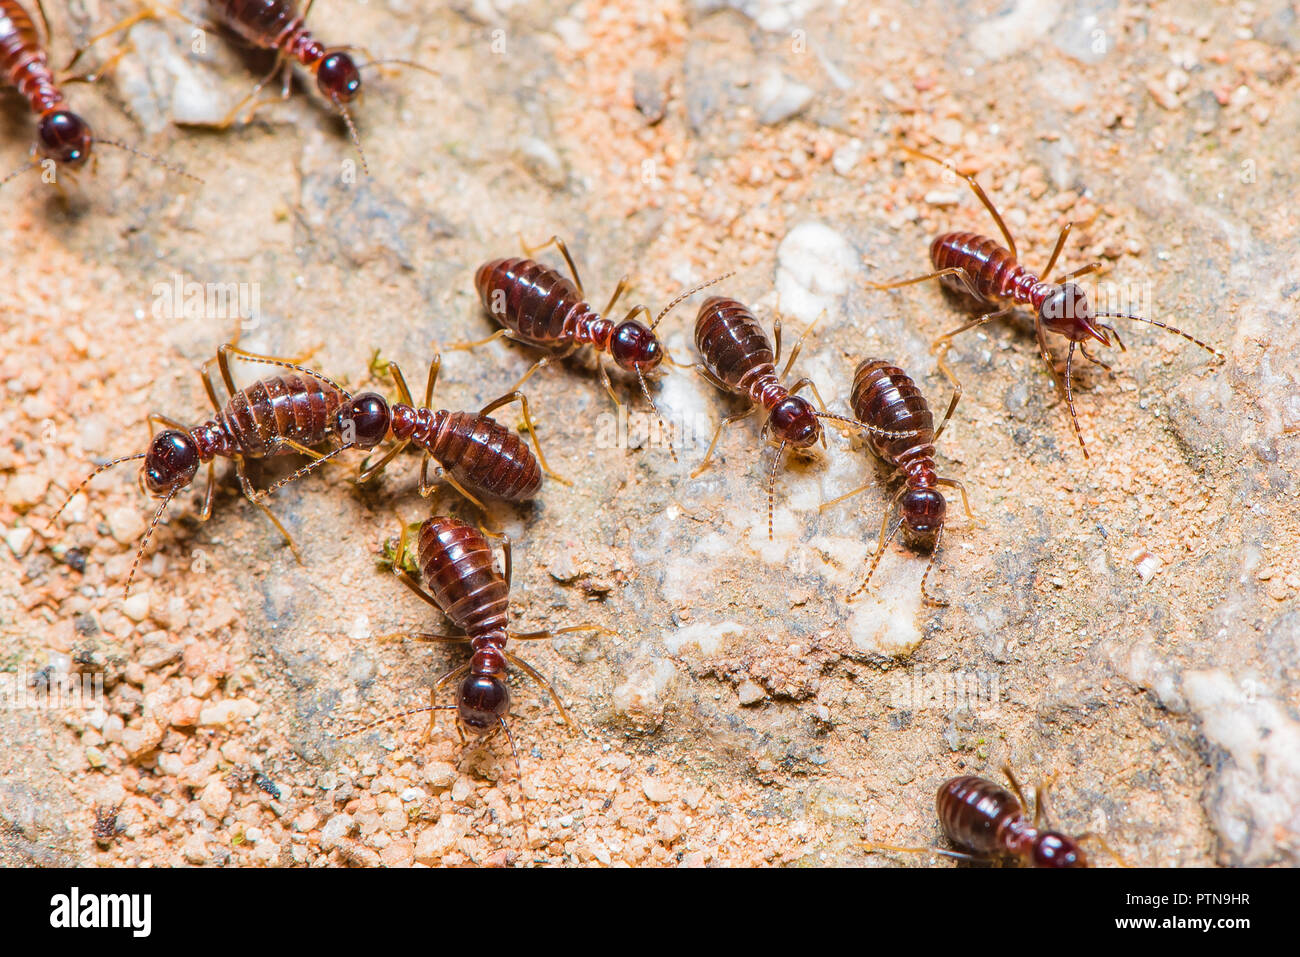 Dark brown termites are walking on the ground back to their nest. Stock Photo